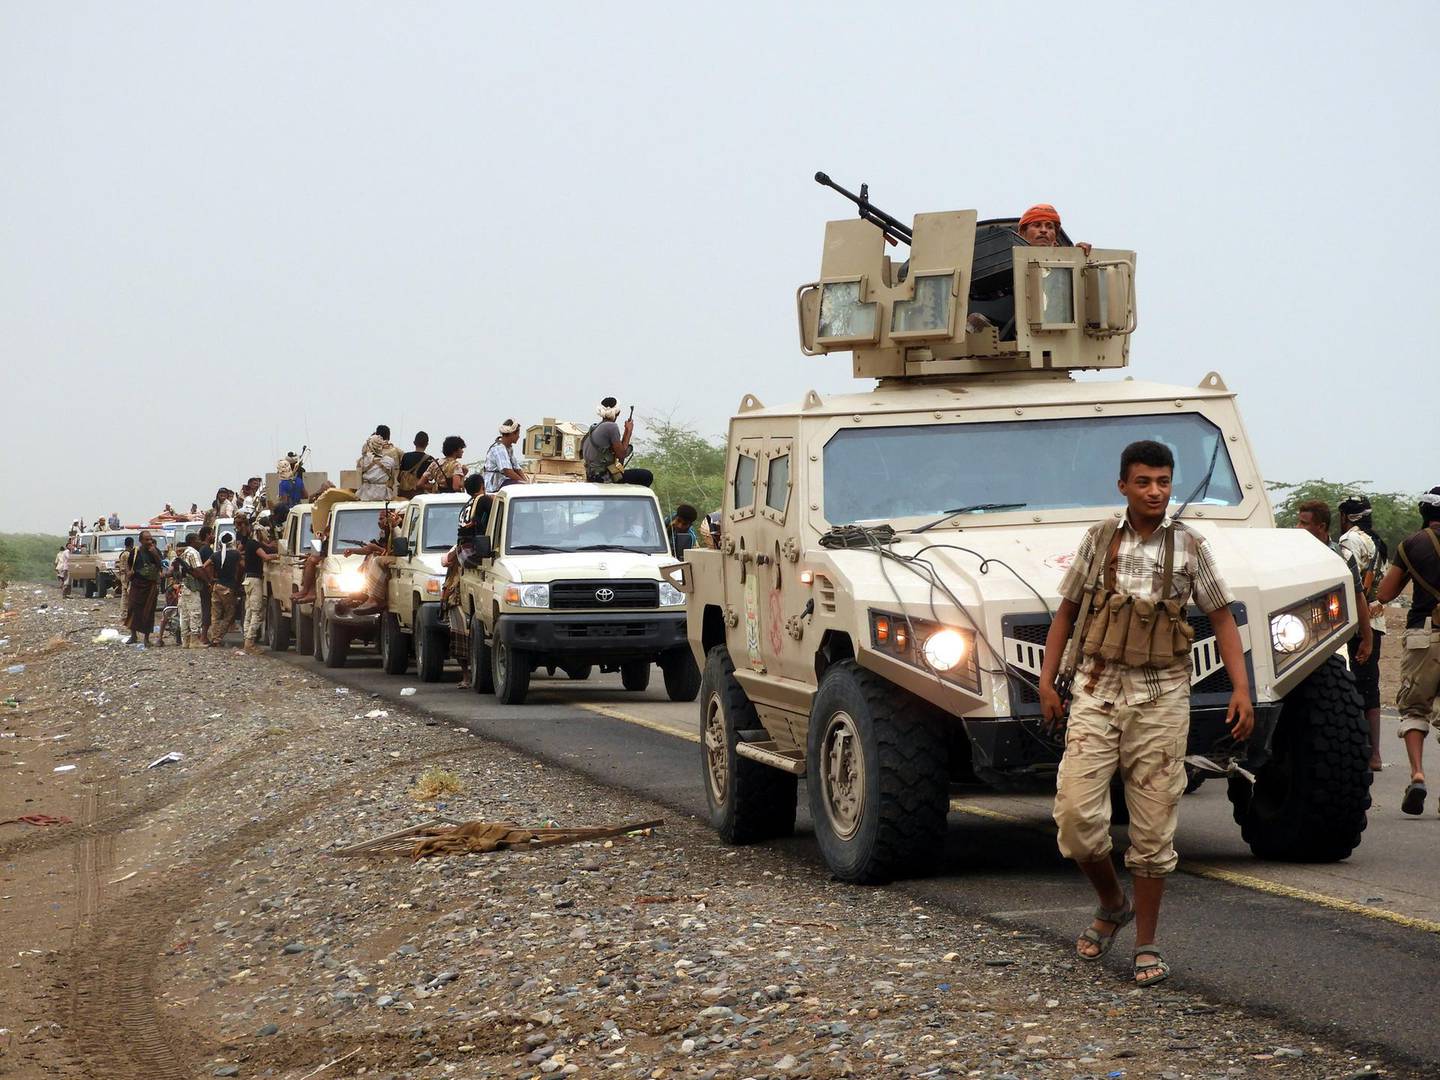 epa06918680 A column of Yemeni government forces and vehicles take position as they fight Houthi rebels in the western port city of Hodeidah, Yemen, 30 July 2018. According to reports, Yemeni government forces backed by the Saudi-led coalition advanced towards the port city of Hodeidah during wide-ranging military operations to retake Hodeidah from Houthi rebels.  EPA/NAJEEB ALMAHBOOBI